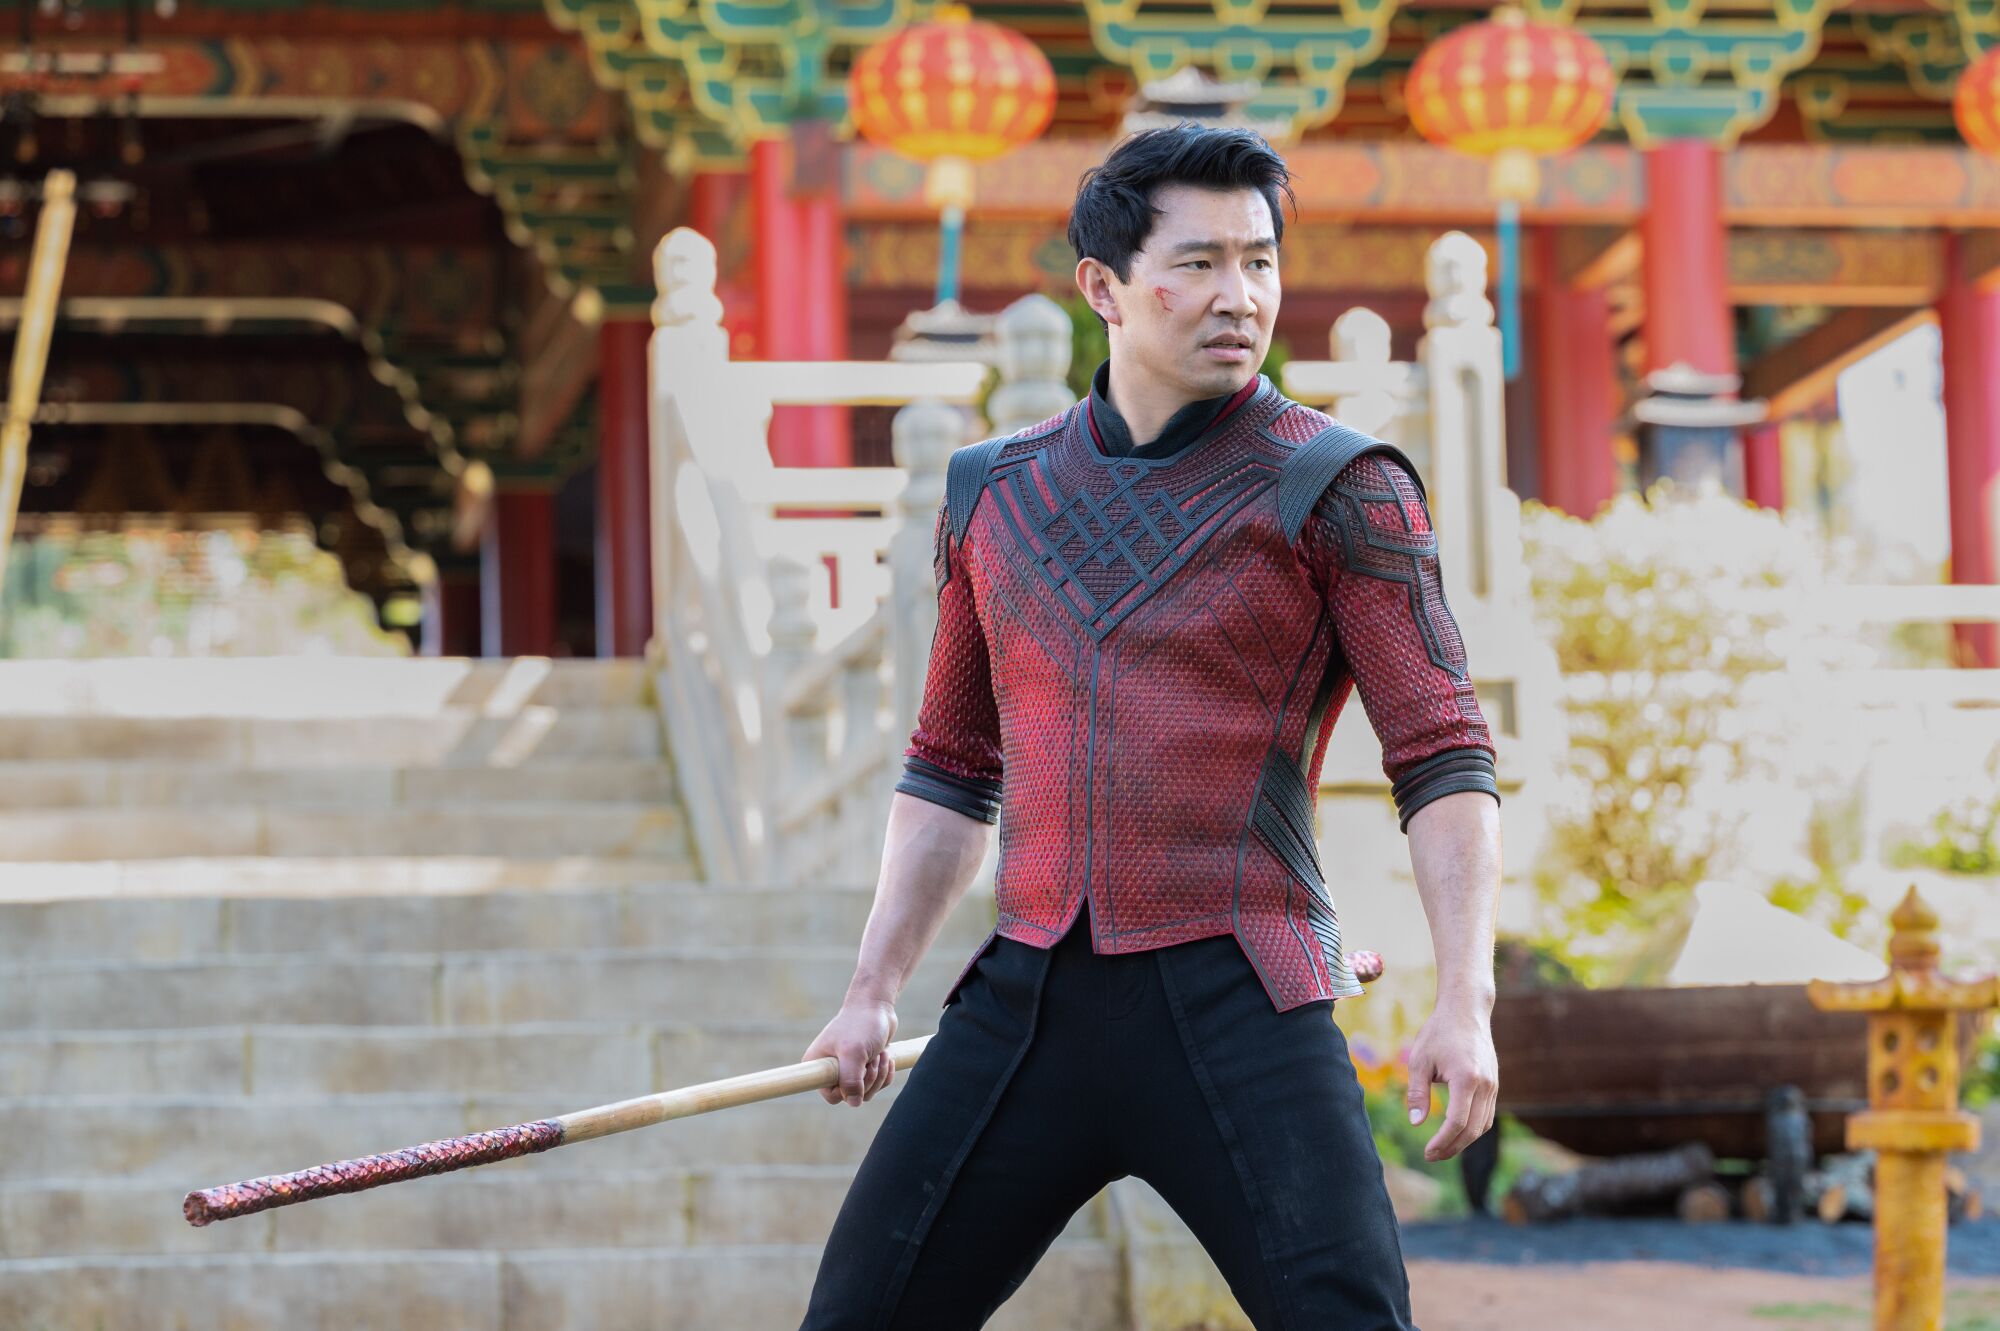 Simu Liu strikes a defiant pose in a scene from "Shang-Chi and the Legend of the Ten Rings."